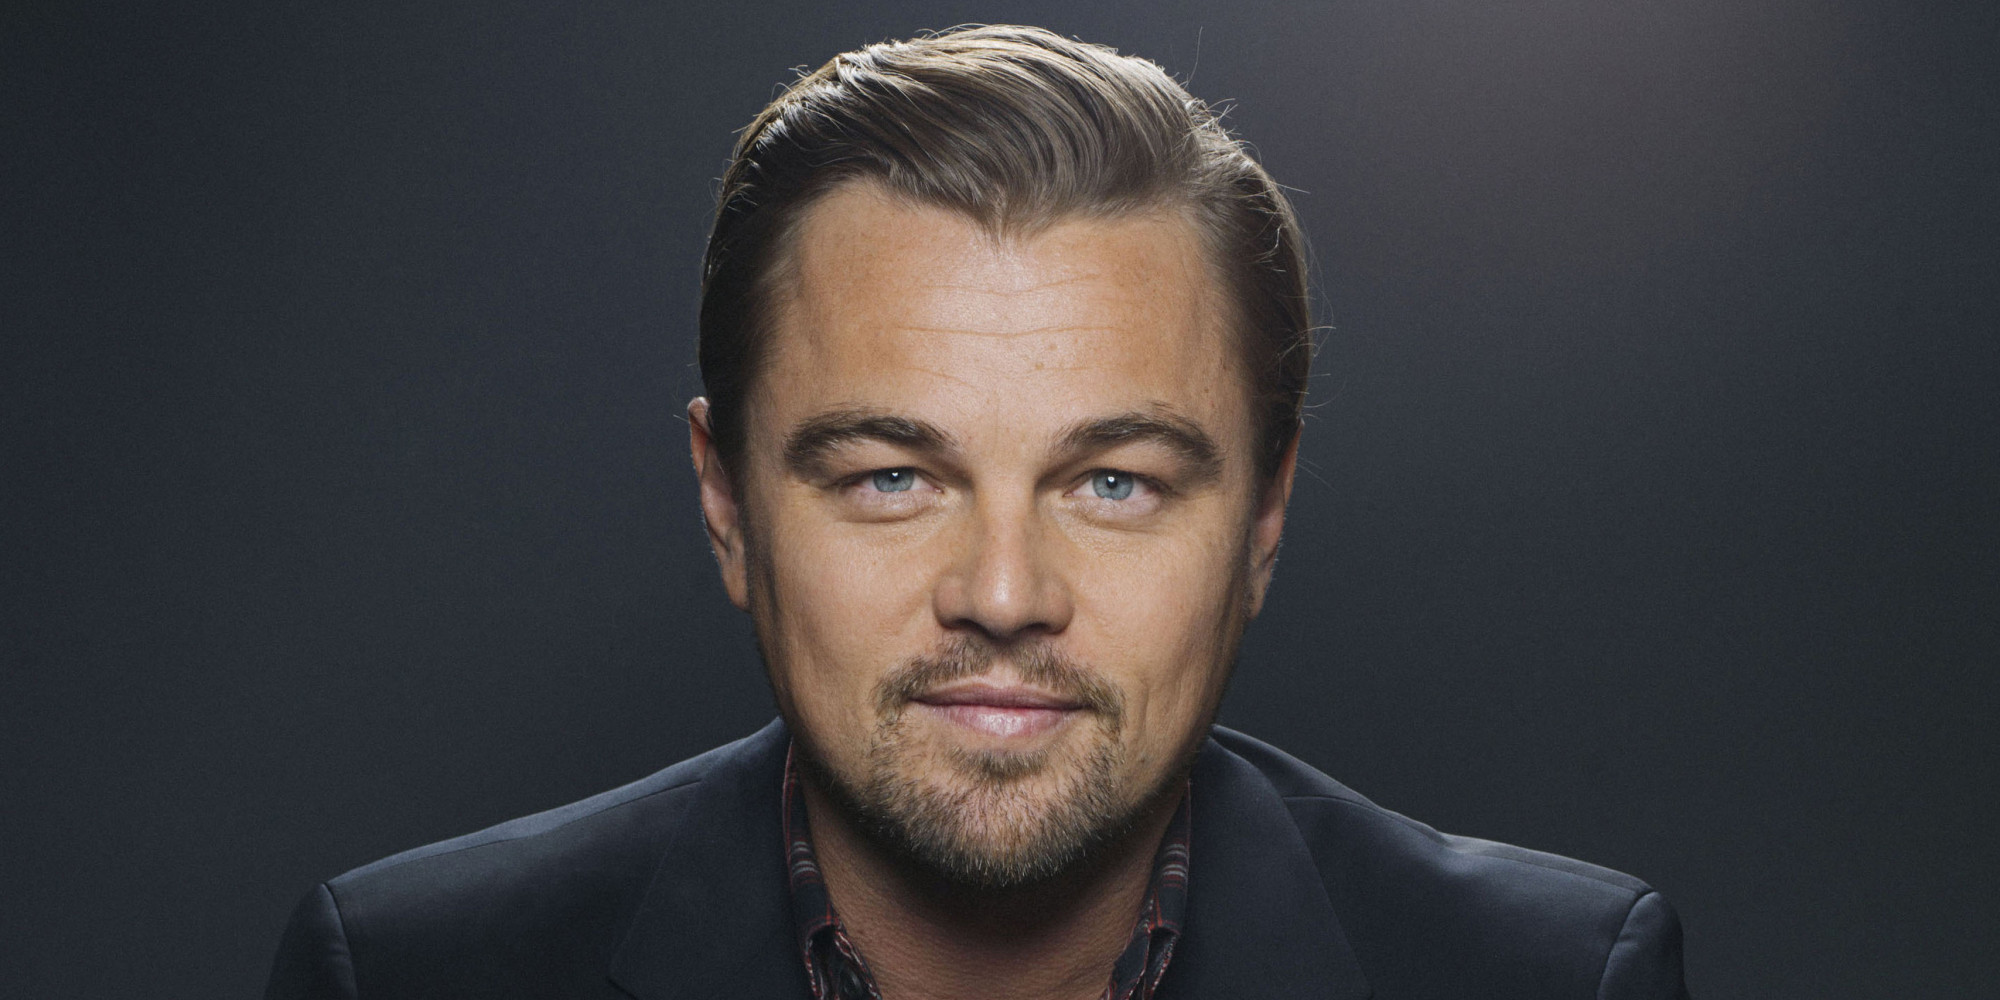 FILE - In this Dec. 15, 2013 file photo, American actor Leonardo DiCaprio poses for a portrait, in New York. The United Nations has named Leonardo DiCaprio a UN Messenger of Peace with a special focus on climate change. UN Secretary-General Ban Ki-moon made the announcement Tuesday, Sept. 16, 2014, calling DiCaprio a credible voice in the environmental movement. He also invited the actor to the upcoming UN Climate Summit planned for September 23. (Photo by Victoria Will/Invision/AP, File)